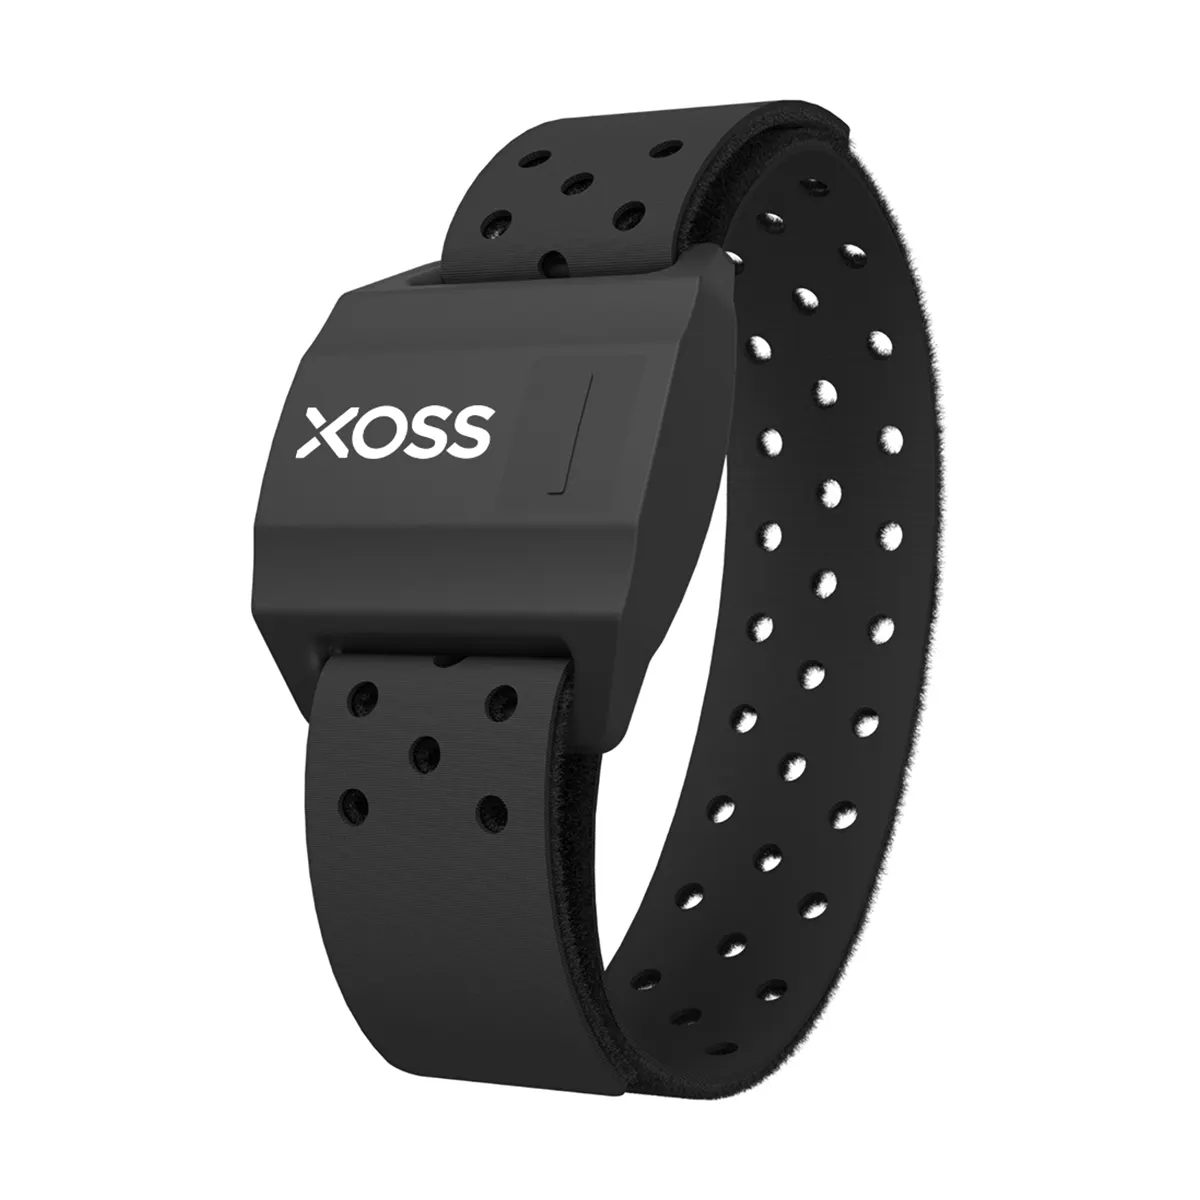 XOSS Arm Heart Rate Monitor Hand Strap BLE ANT+ Fitness Sensor Multiple Bracelet Strap For Garmin Bryton Cycling Bicycle Sports